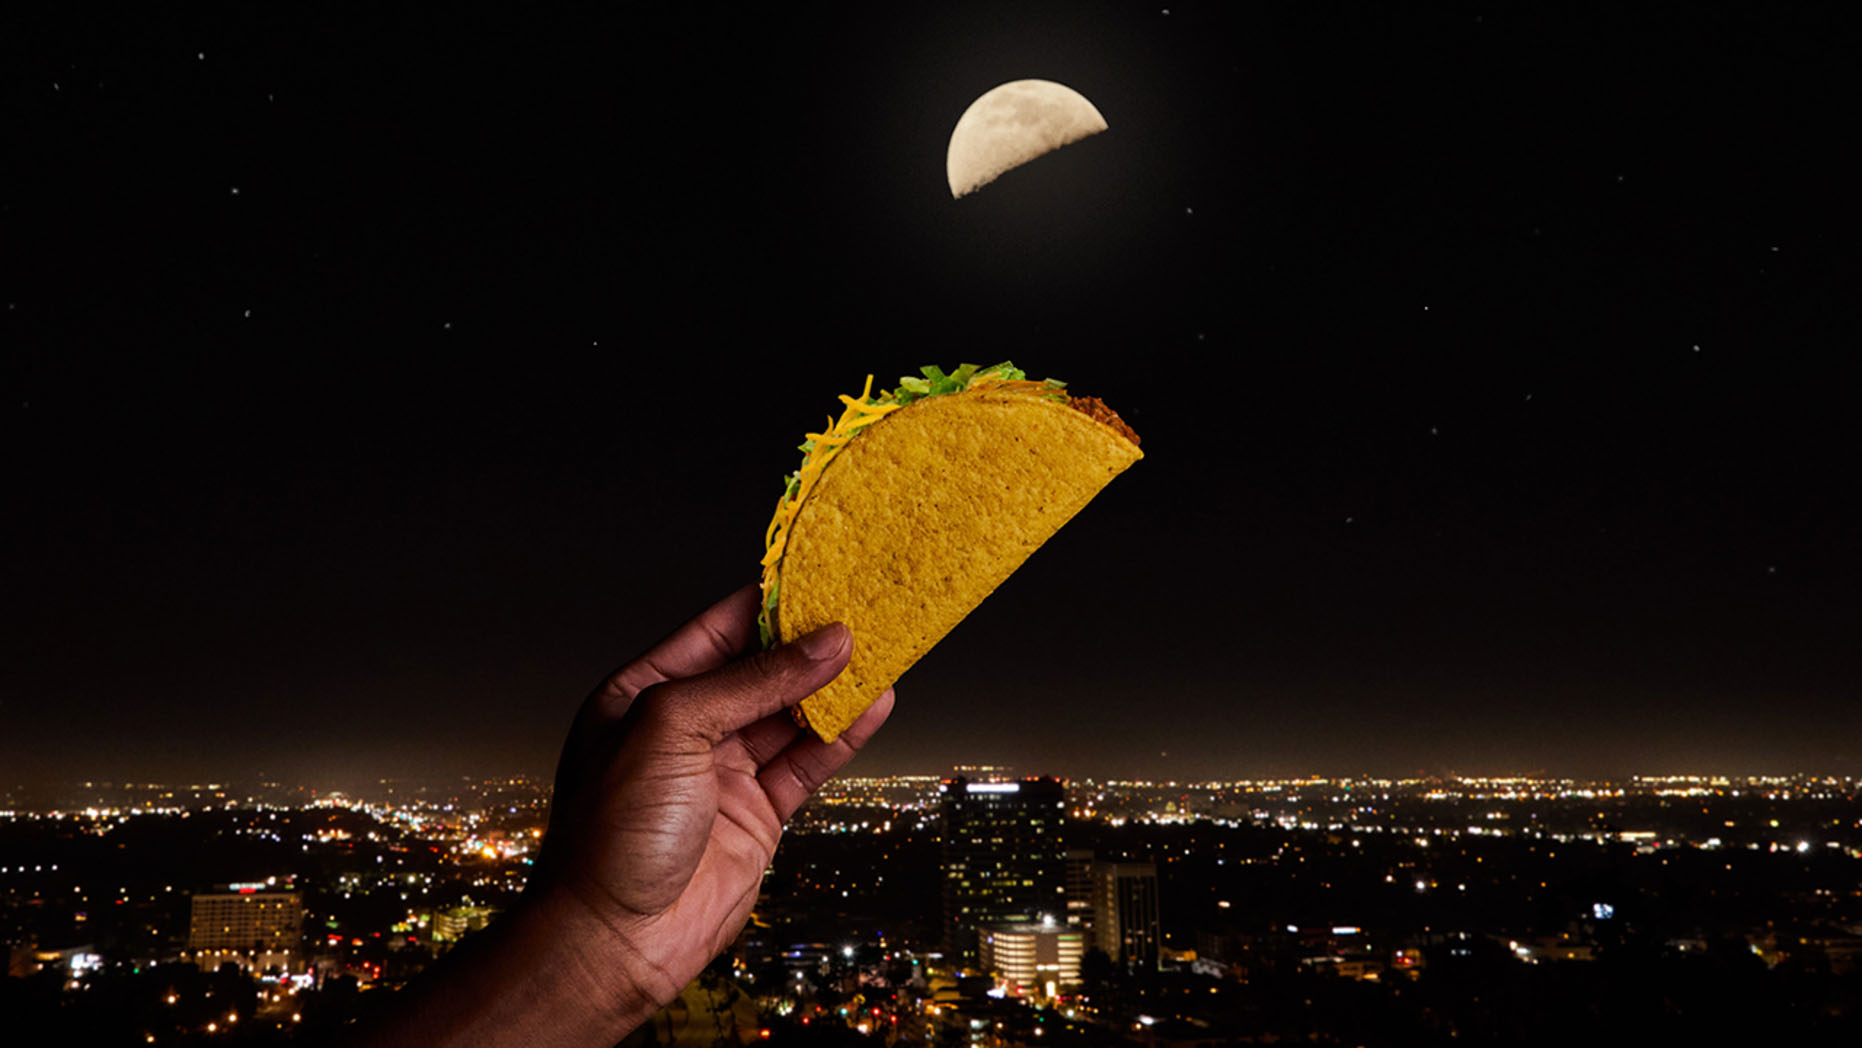 Celebrate the ‘Taco Moon’ with a free taco from Taco Bell tonight!